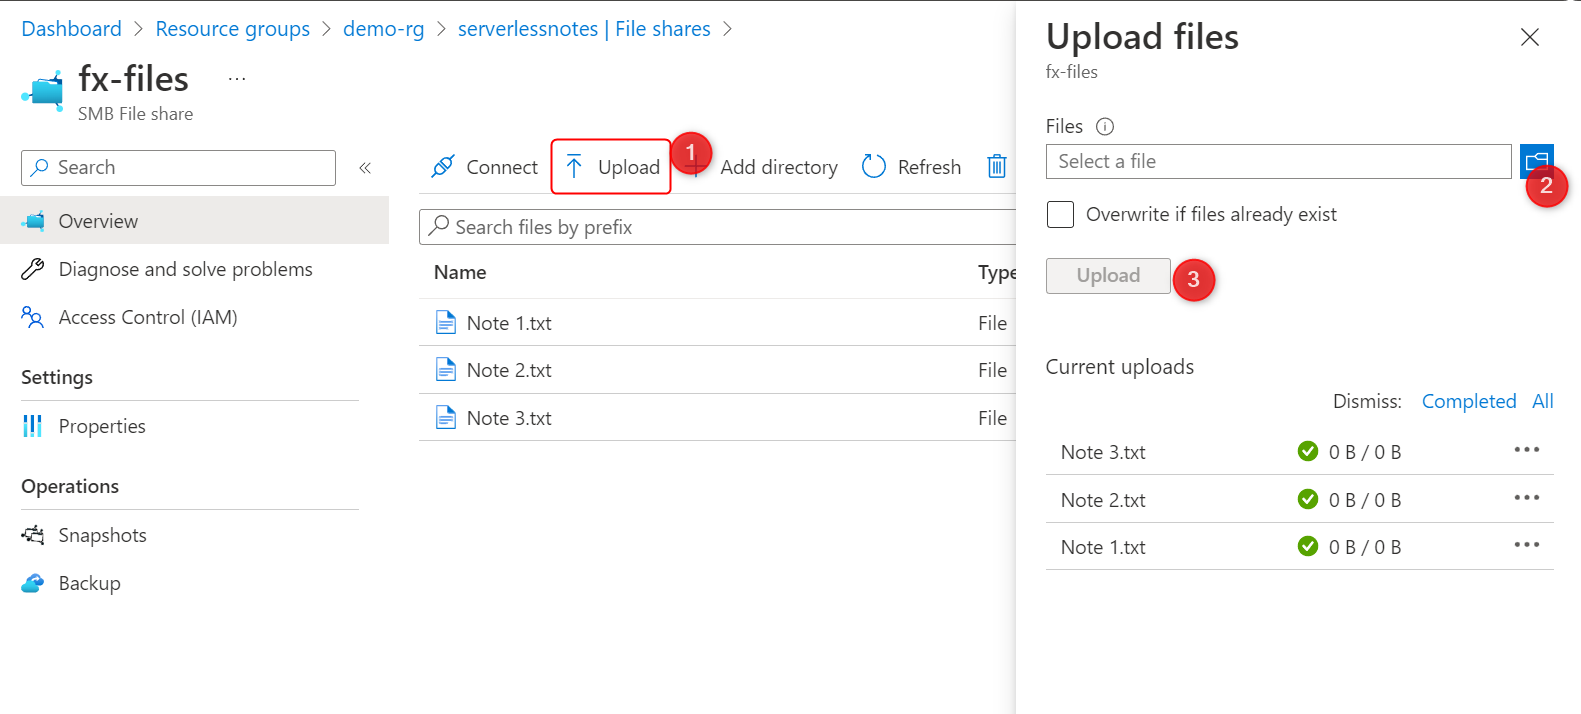 Mounting File Shares on Linux Azure Function Apps